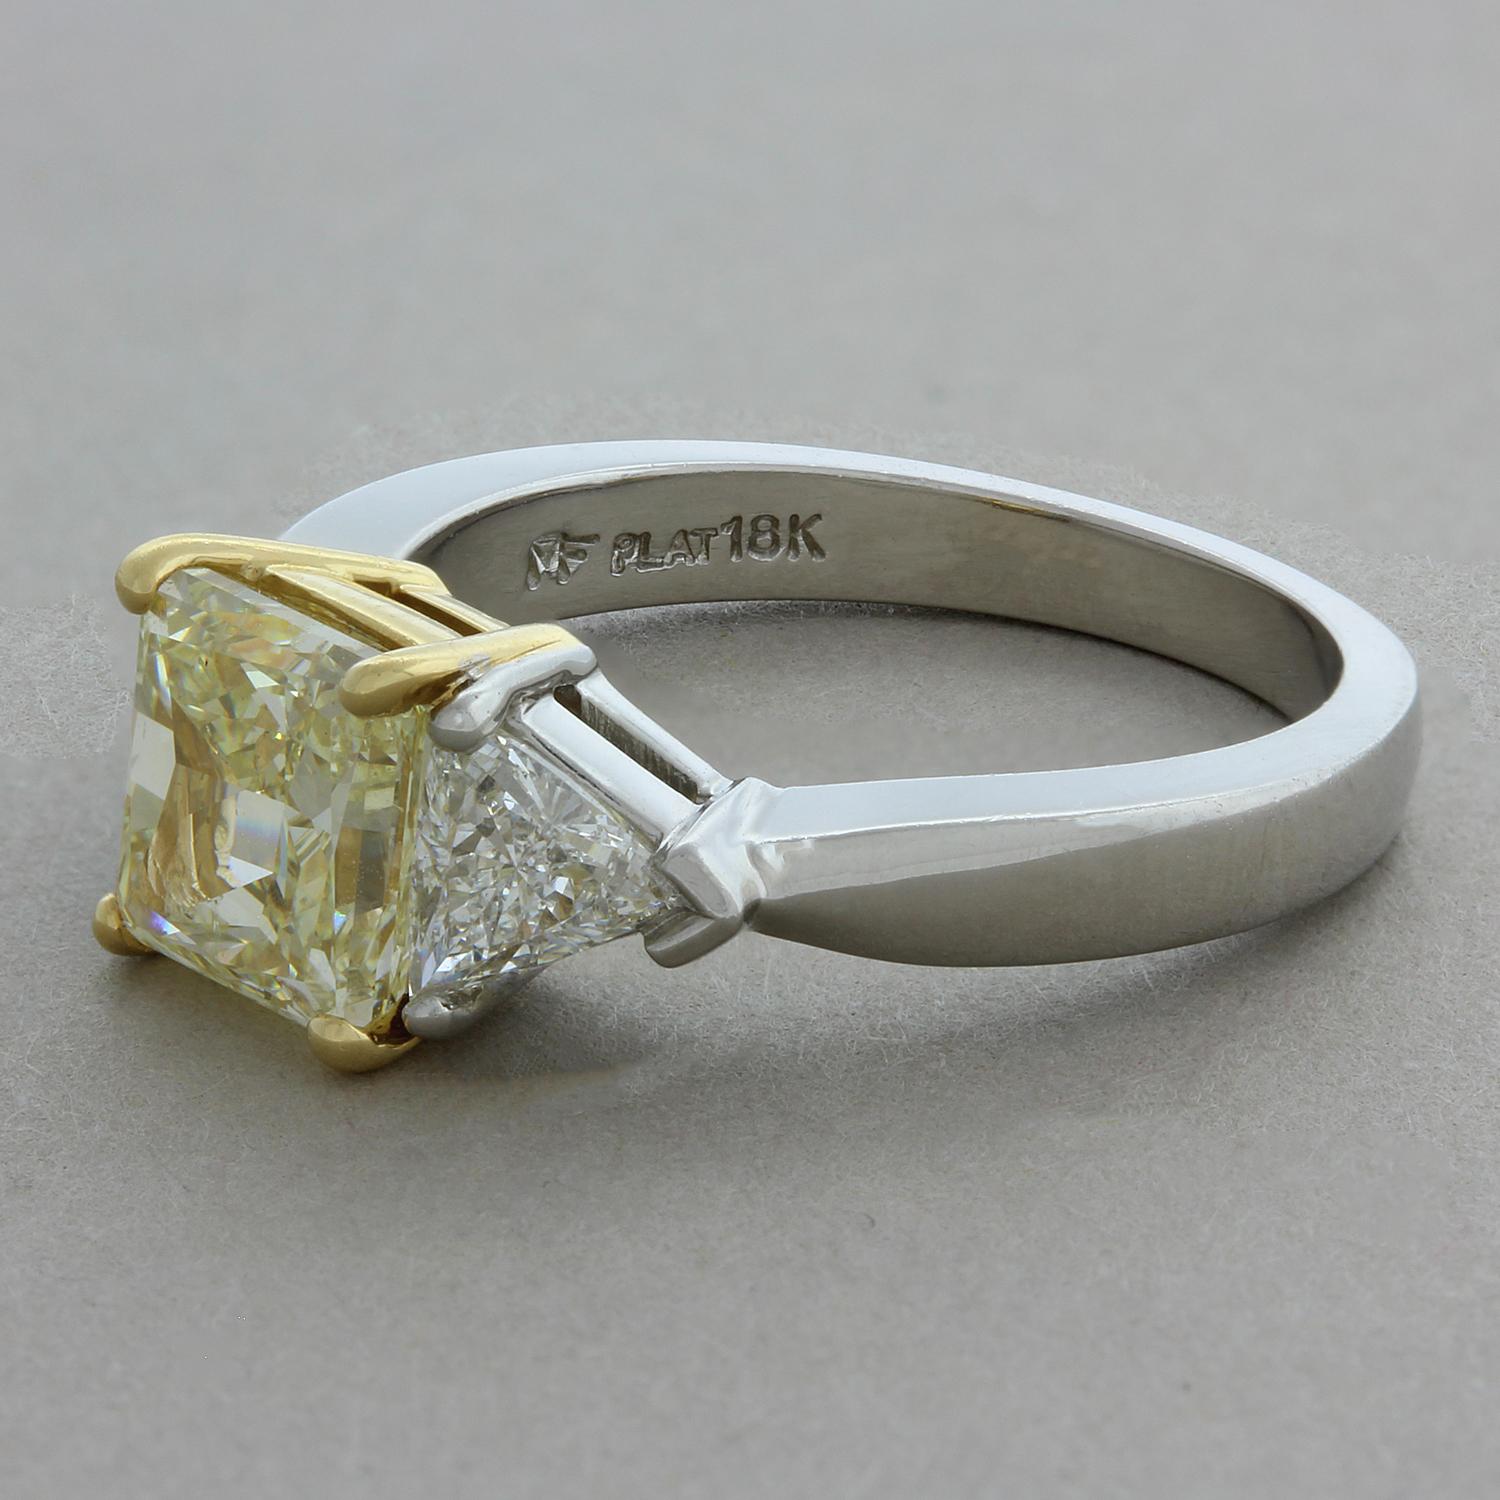 This contemporary engagement ring features a 2.01 carat princess cut fancy yellow diamond in an 18K yellow gold setting. The center diamond is accented by two trillion cut diamonds weighting a total of 0.70 carats, set in platinum. A timeless and